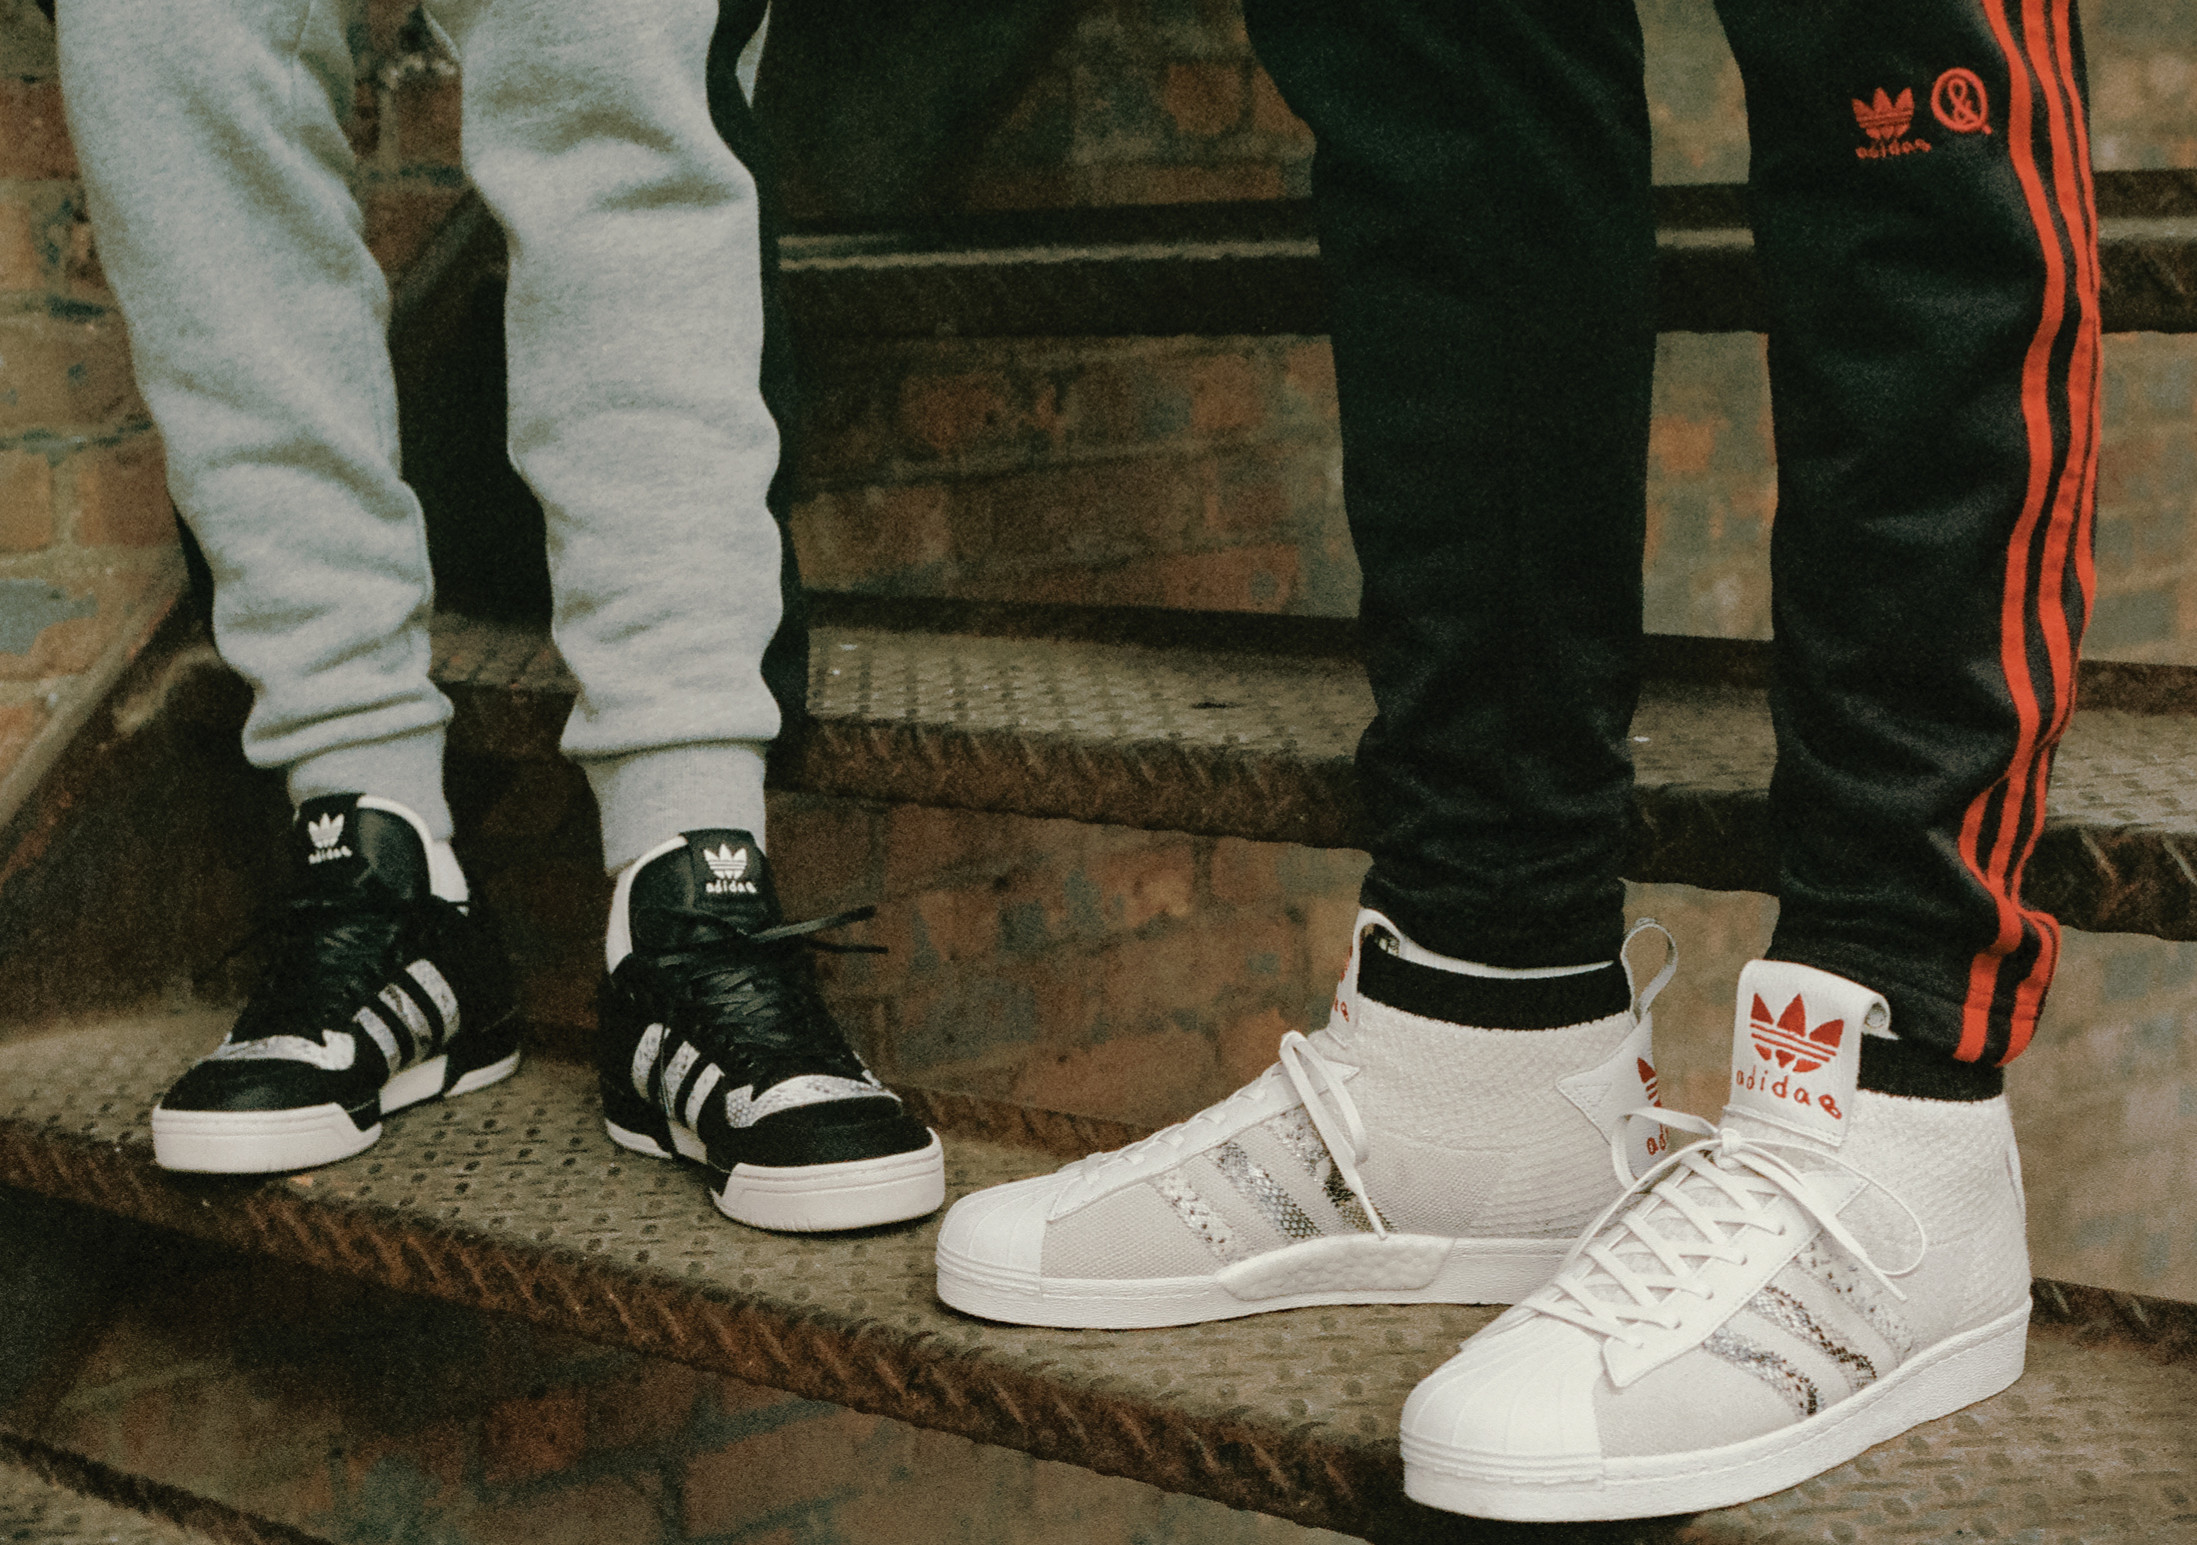 Adidas Is Dropping Another United Arrows and Sons Collab | Complex